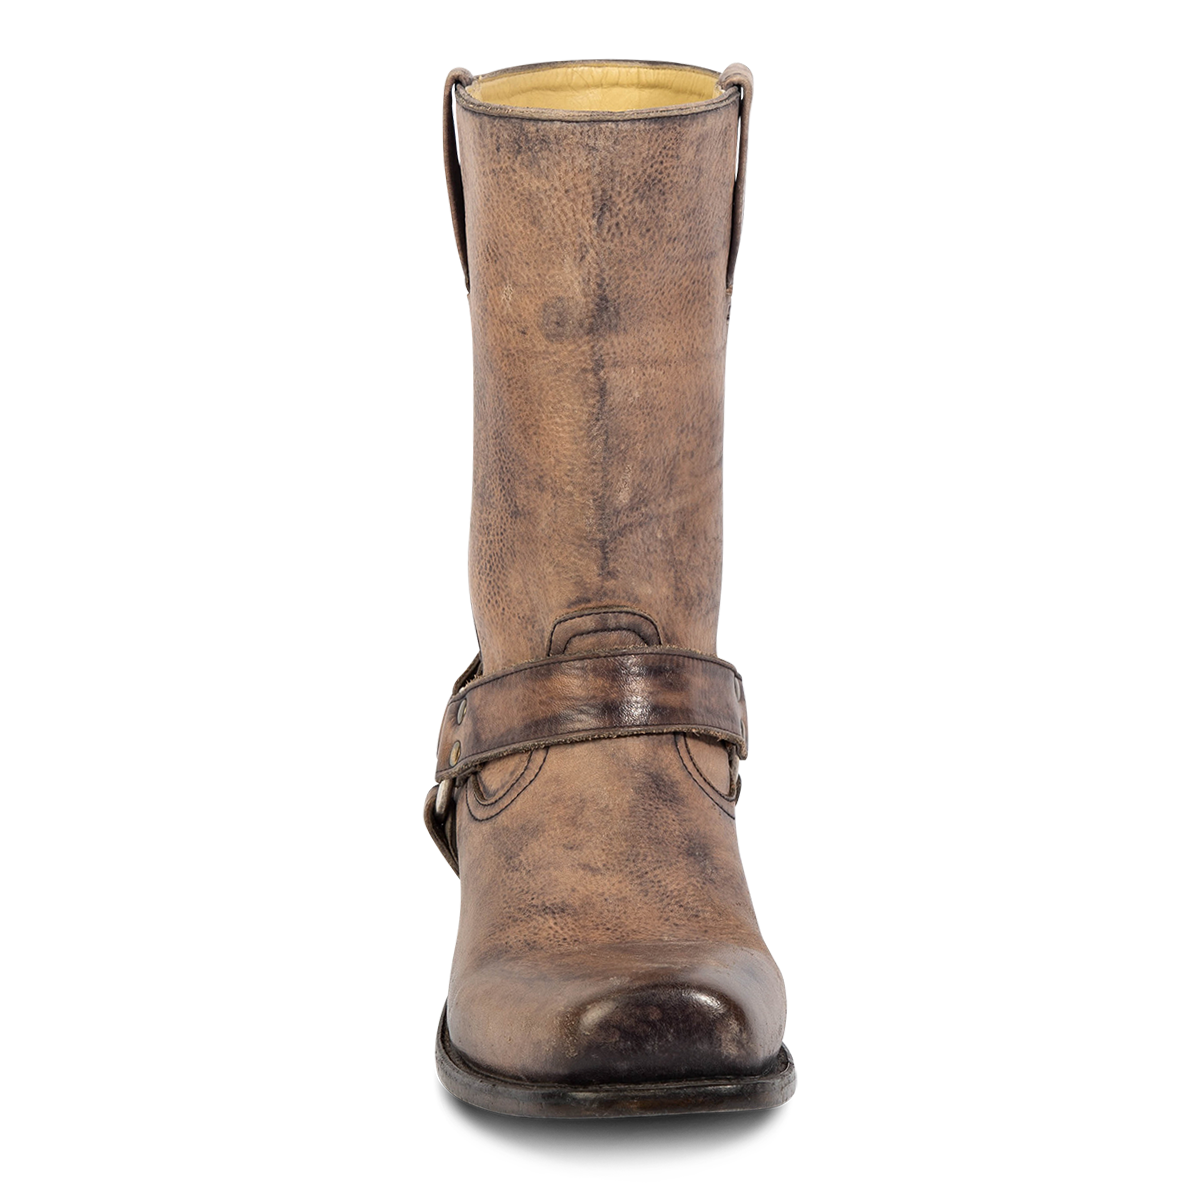 Front view showing distressed shaft and leather ankle harness on FREEBIRD men's Copperhead grey distressed boot